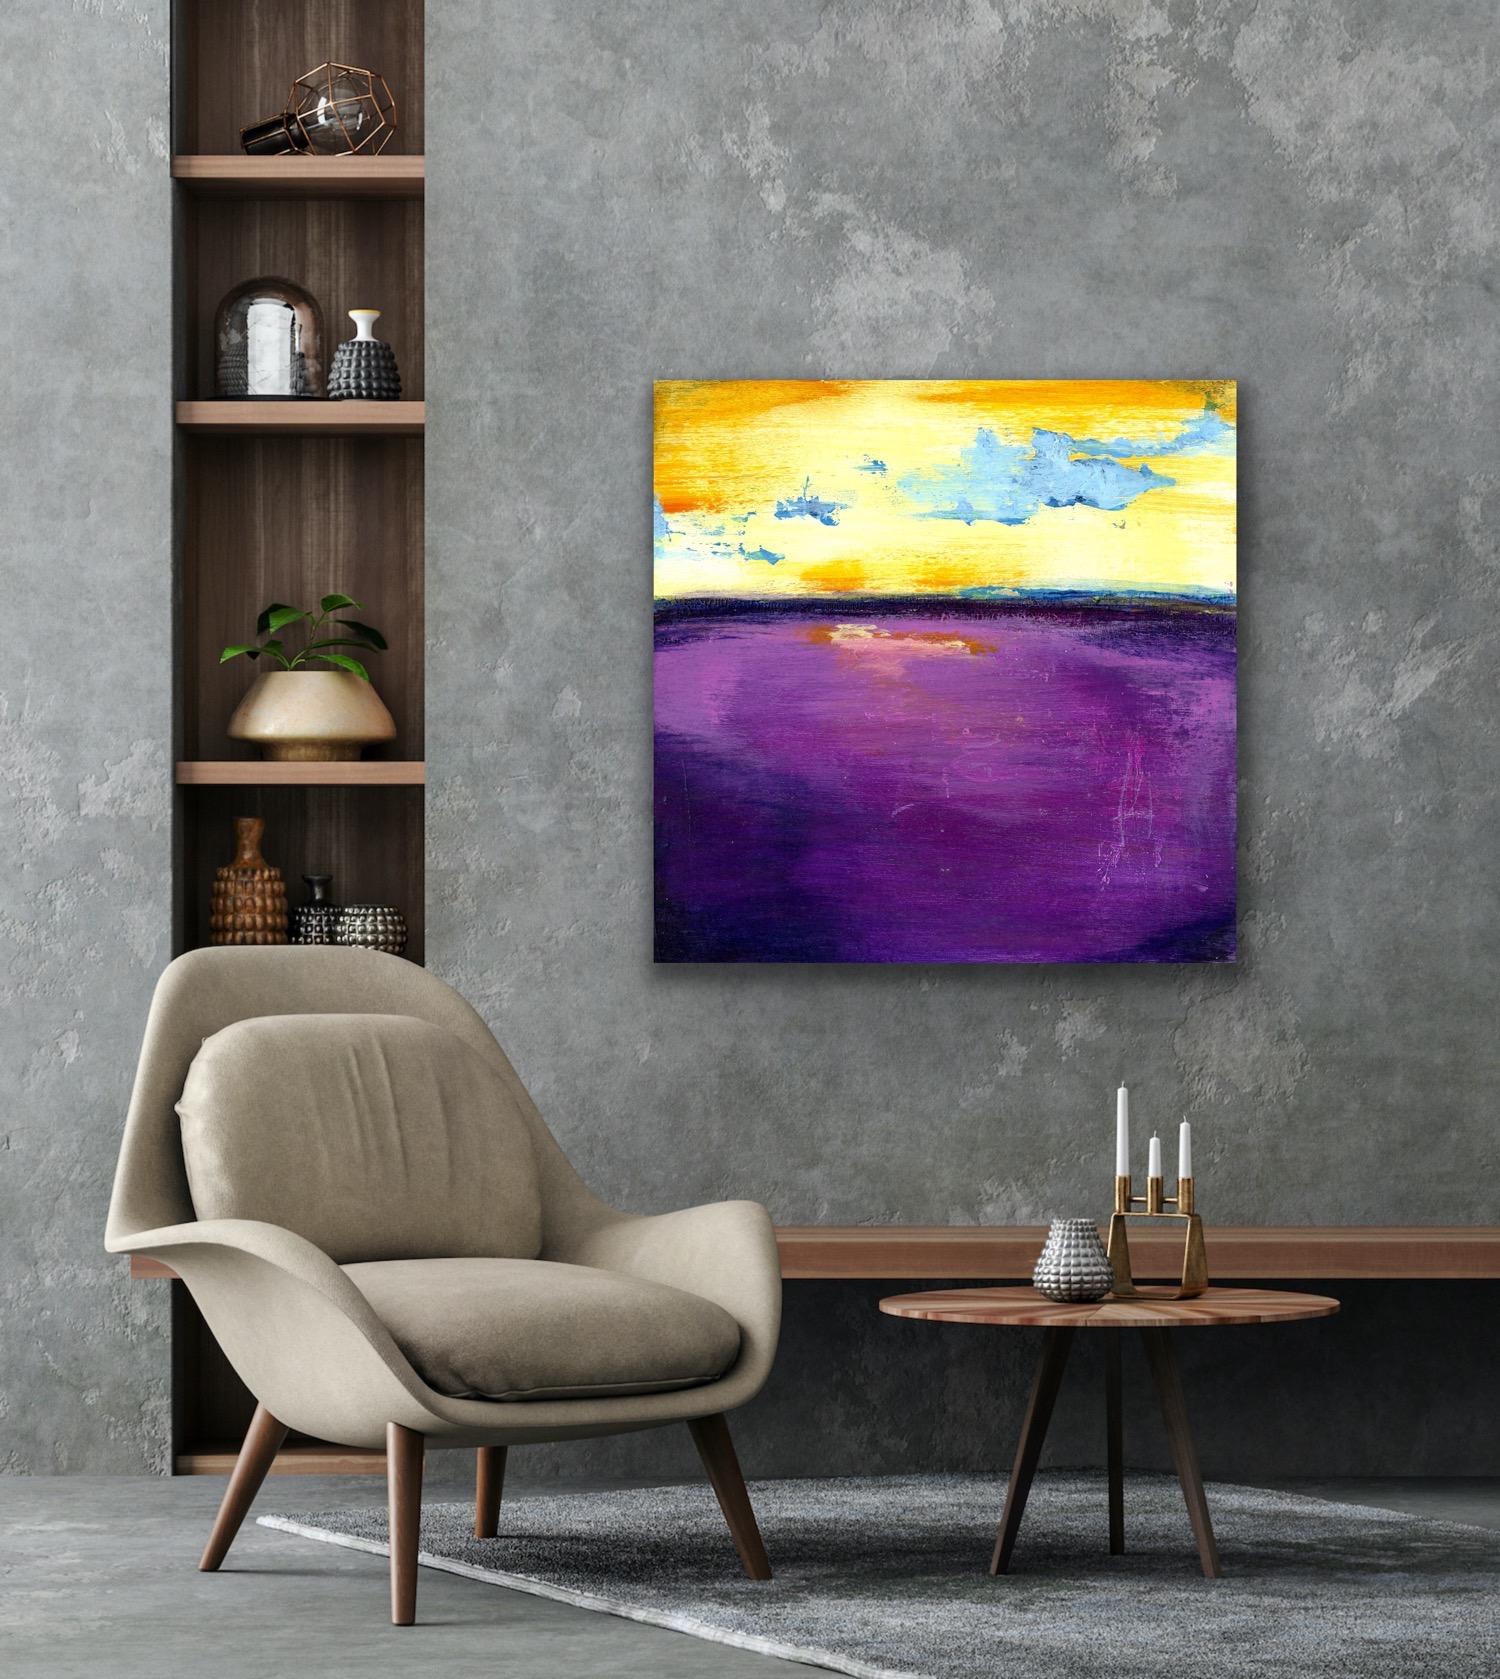 Modern Wall Print Art, Abstract Ocean Landscape Giclee, Limited Edition Signed For Sale 3